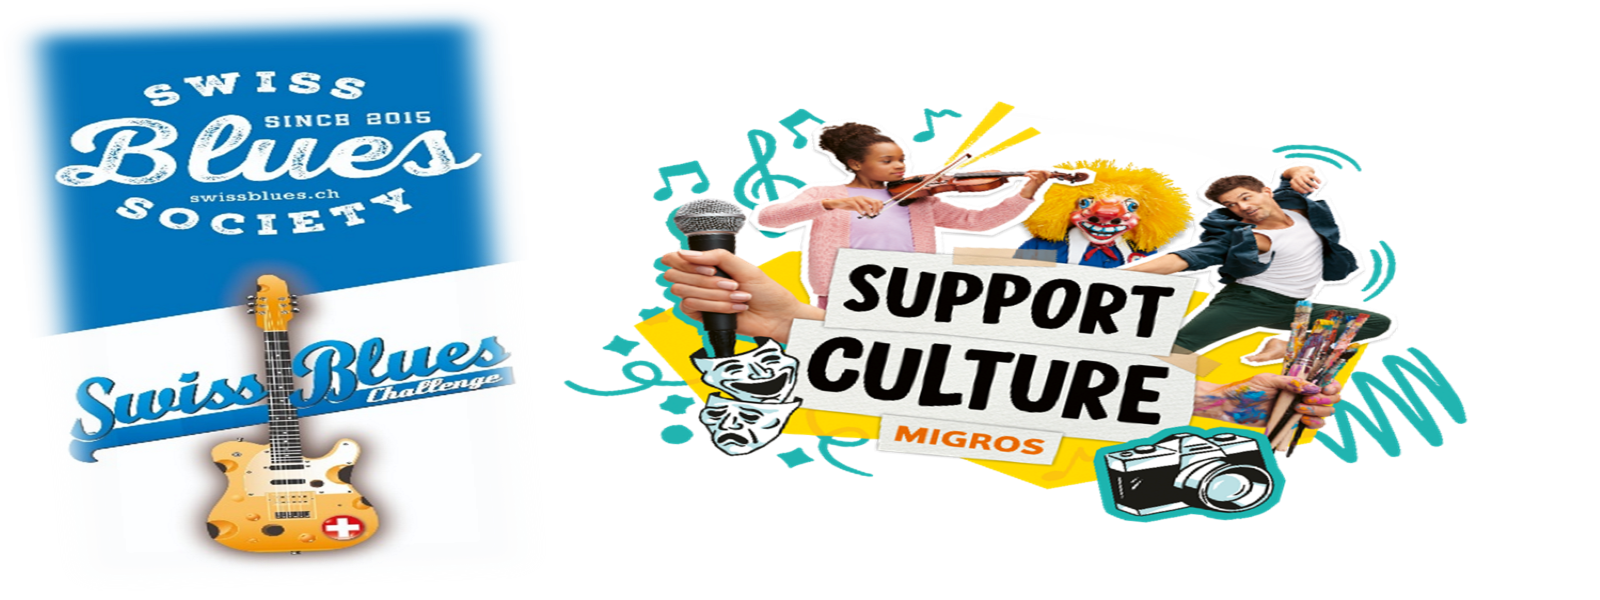 Swiss Blues Society - Support Culture @Migros